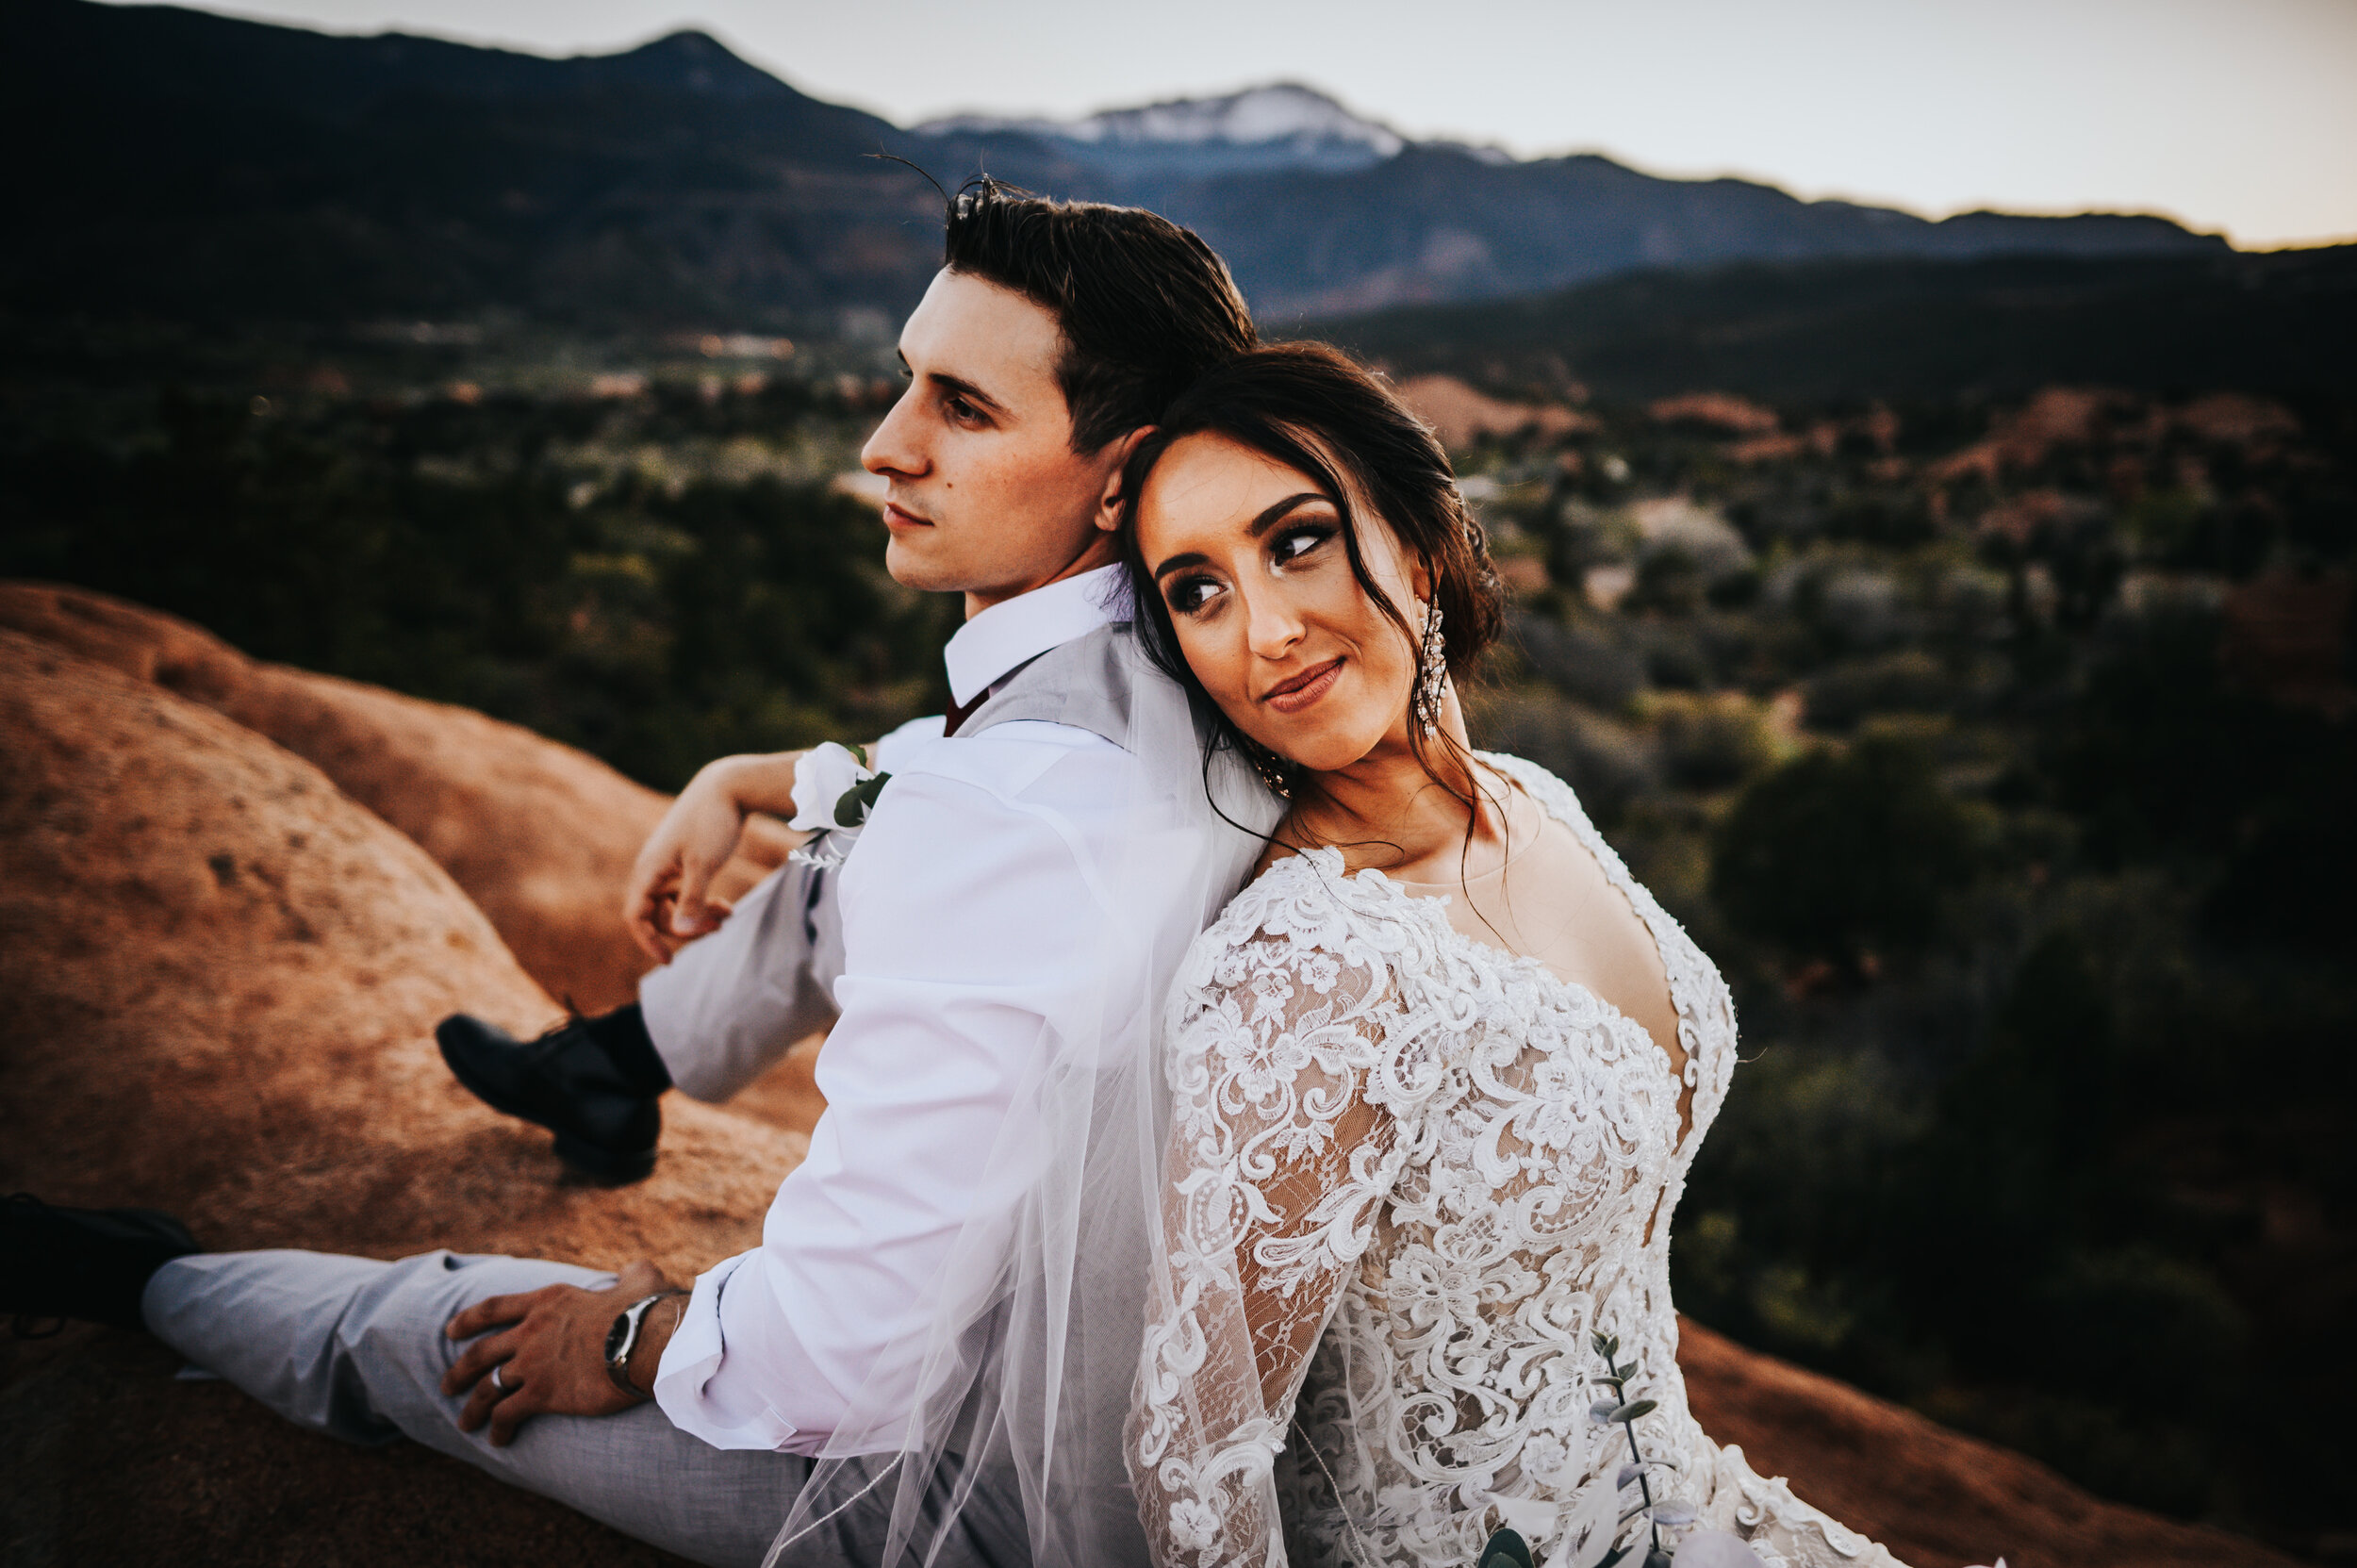 Kenzie and Kody Elopement Colorado Springs Sunset The Pinery at the Hill Garden of the Gods Wild Prairie Photography-42-2020.jpg